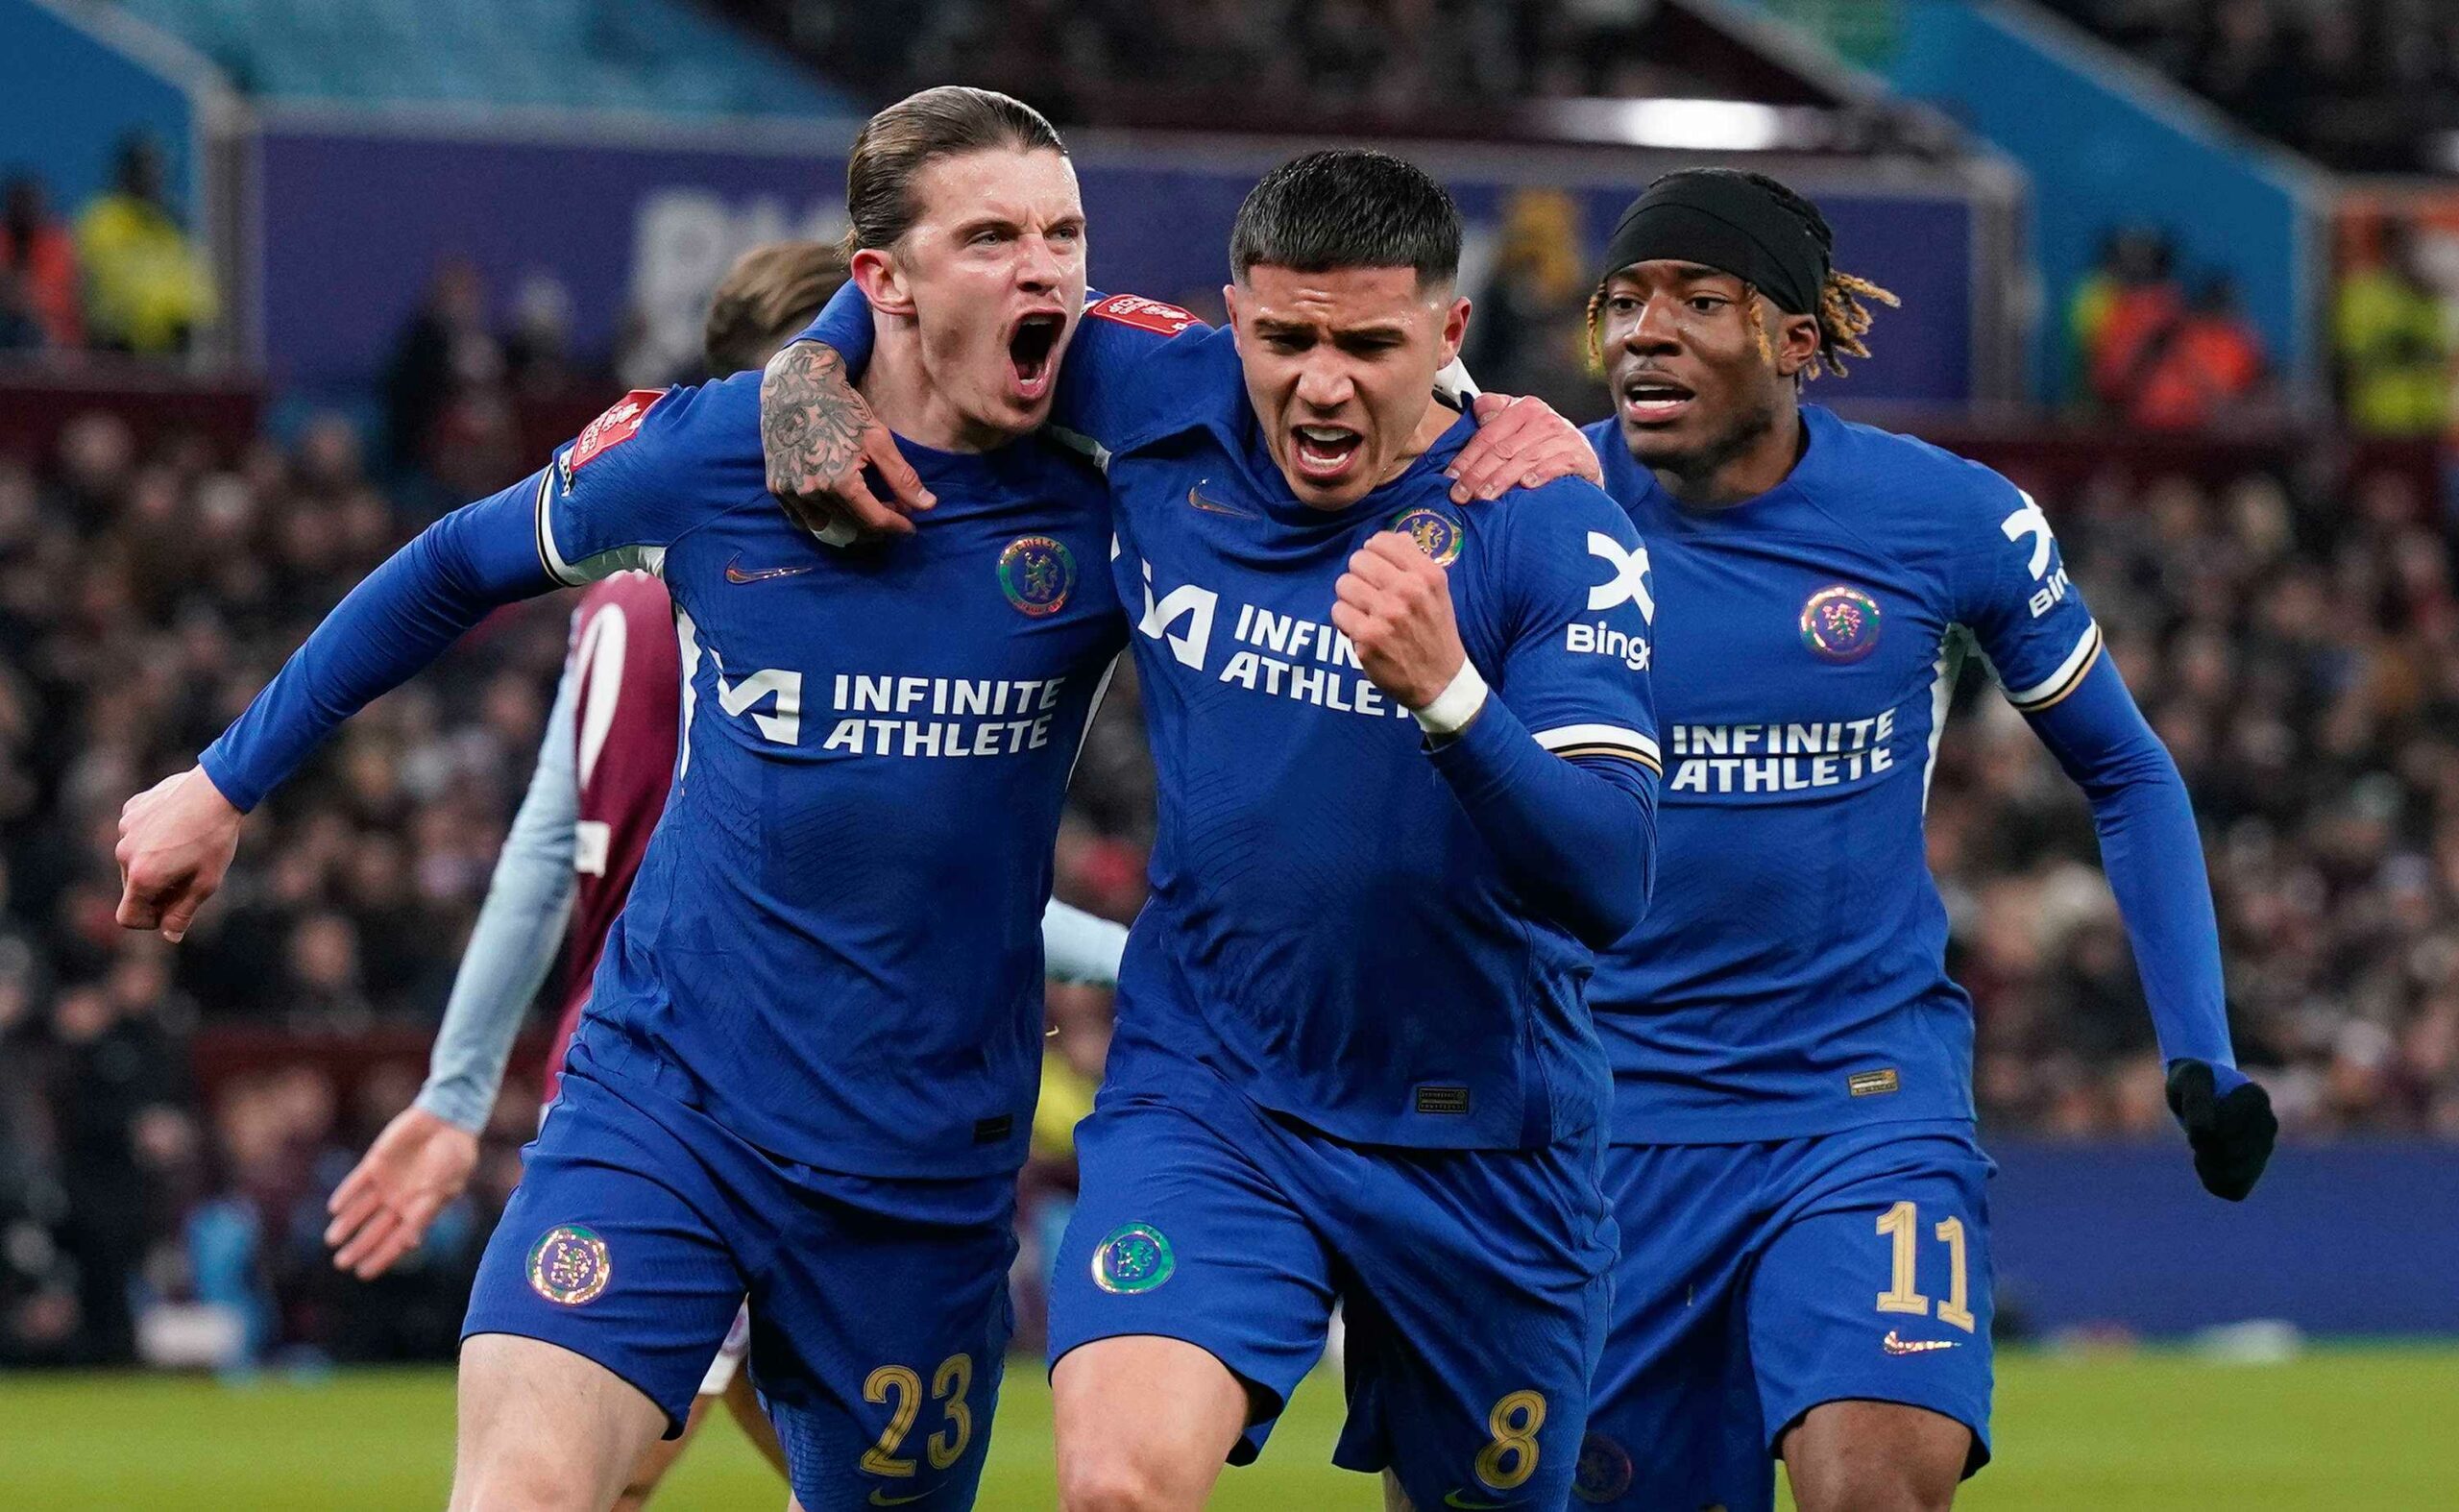 Chelsea celebrating in the FA cup after a Conor Gallagher goal